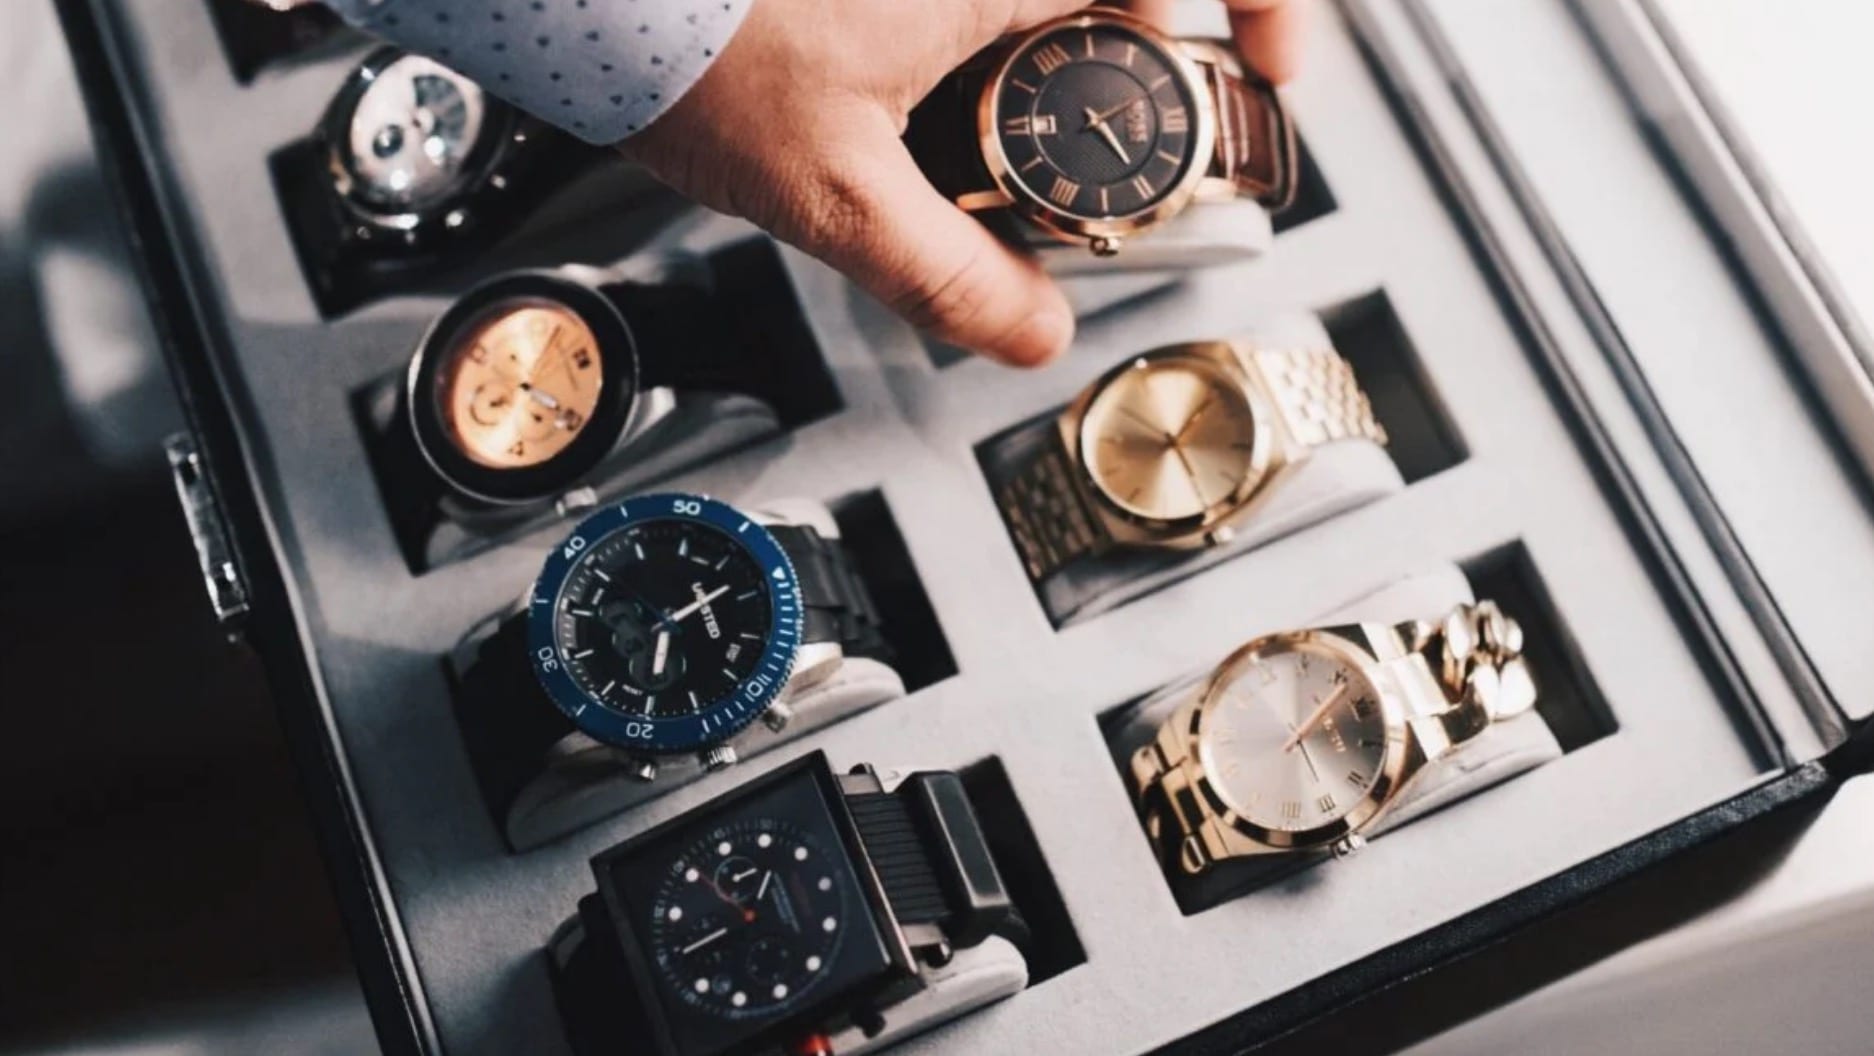 4 Best Music-Inspired Watches to Buy